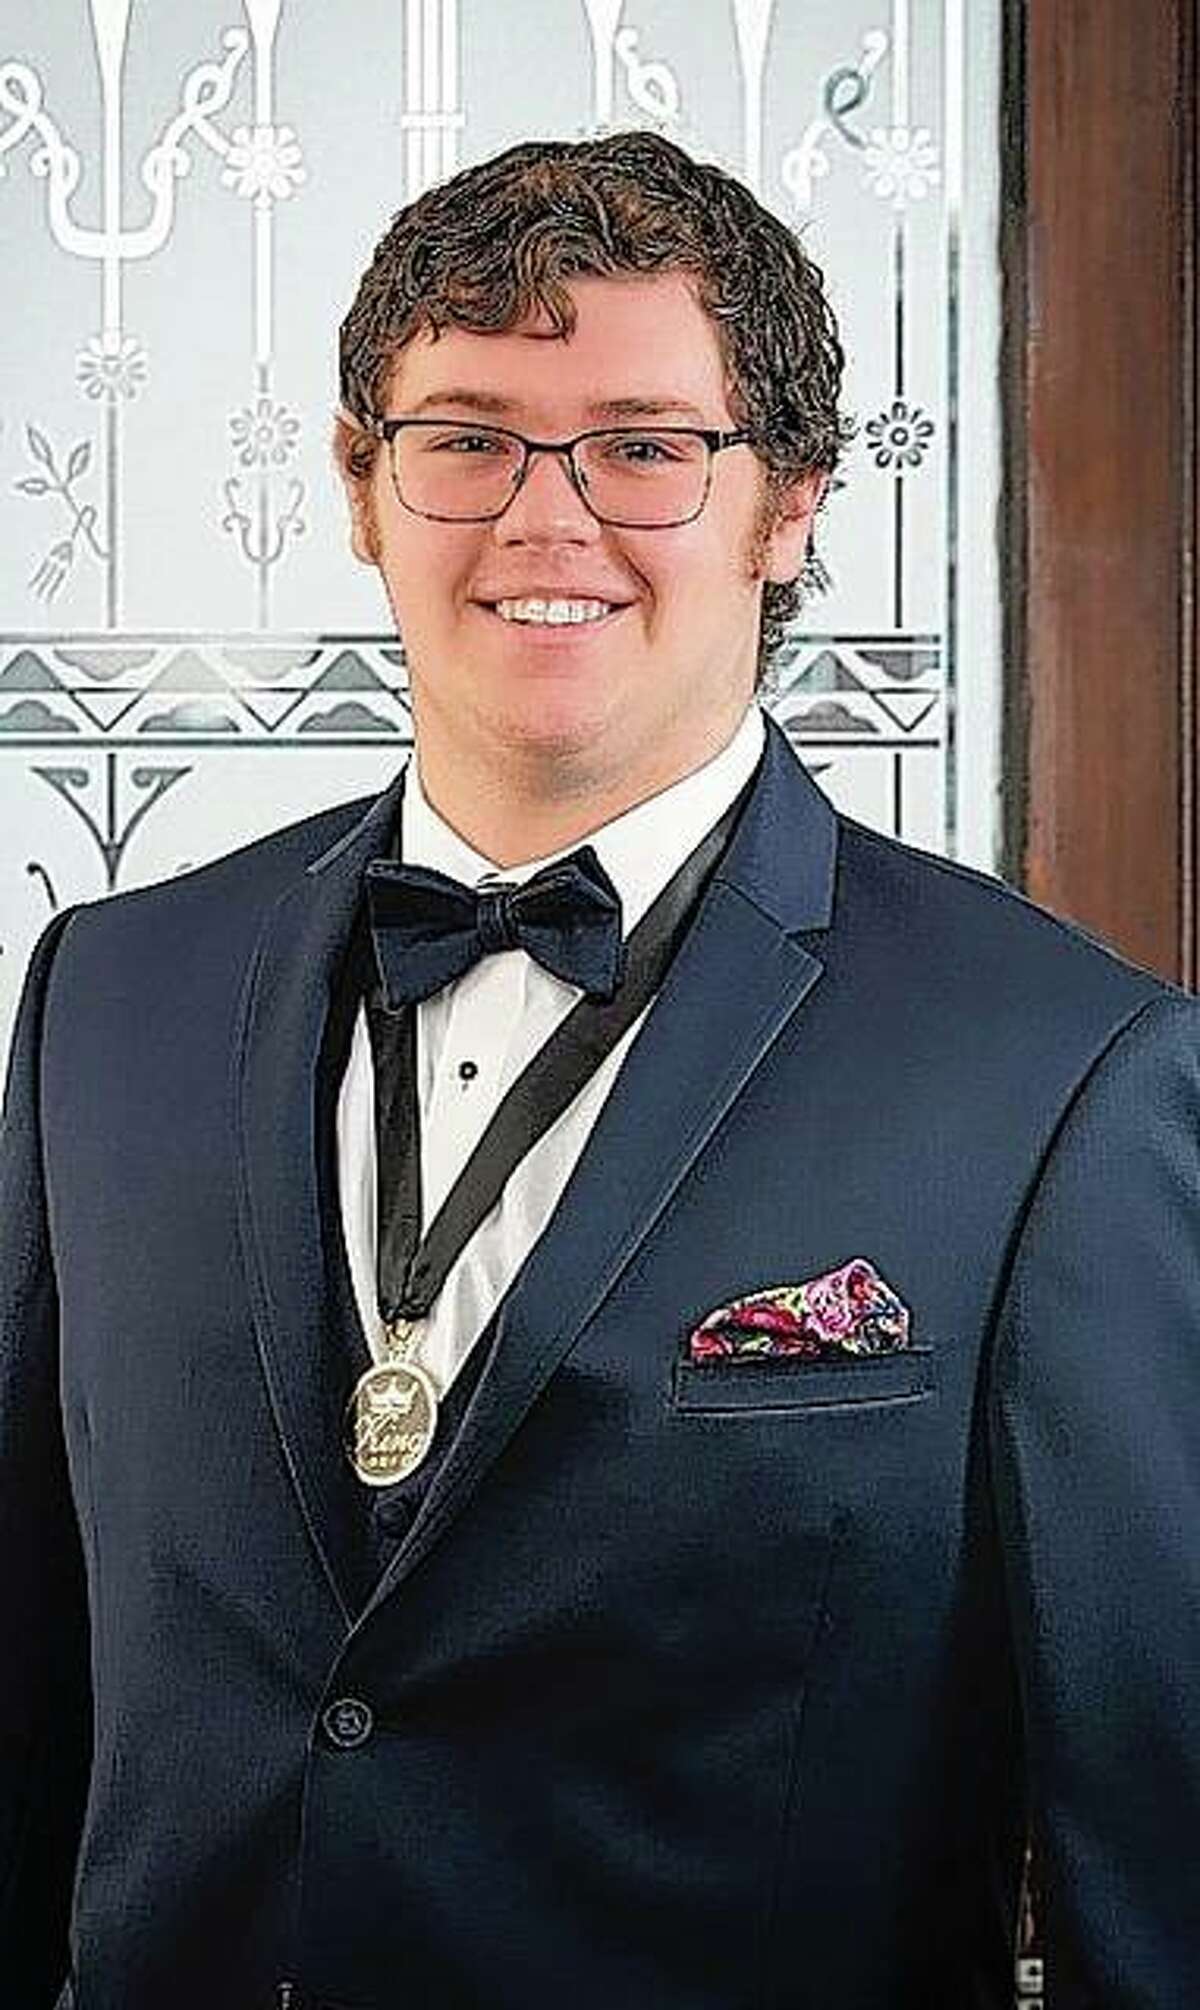 Owen Blackorby is the Art Association of Jacksonville’s reigning Beaux Arts Ball king. He will relinquish his crown July 31.